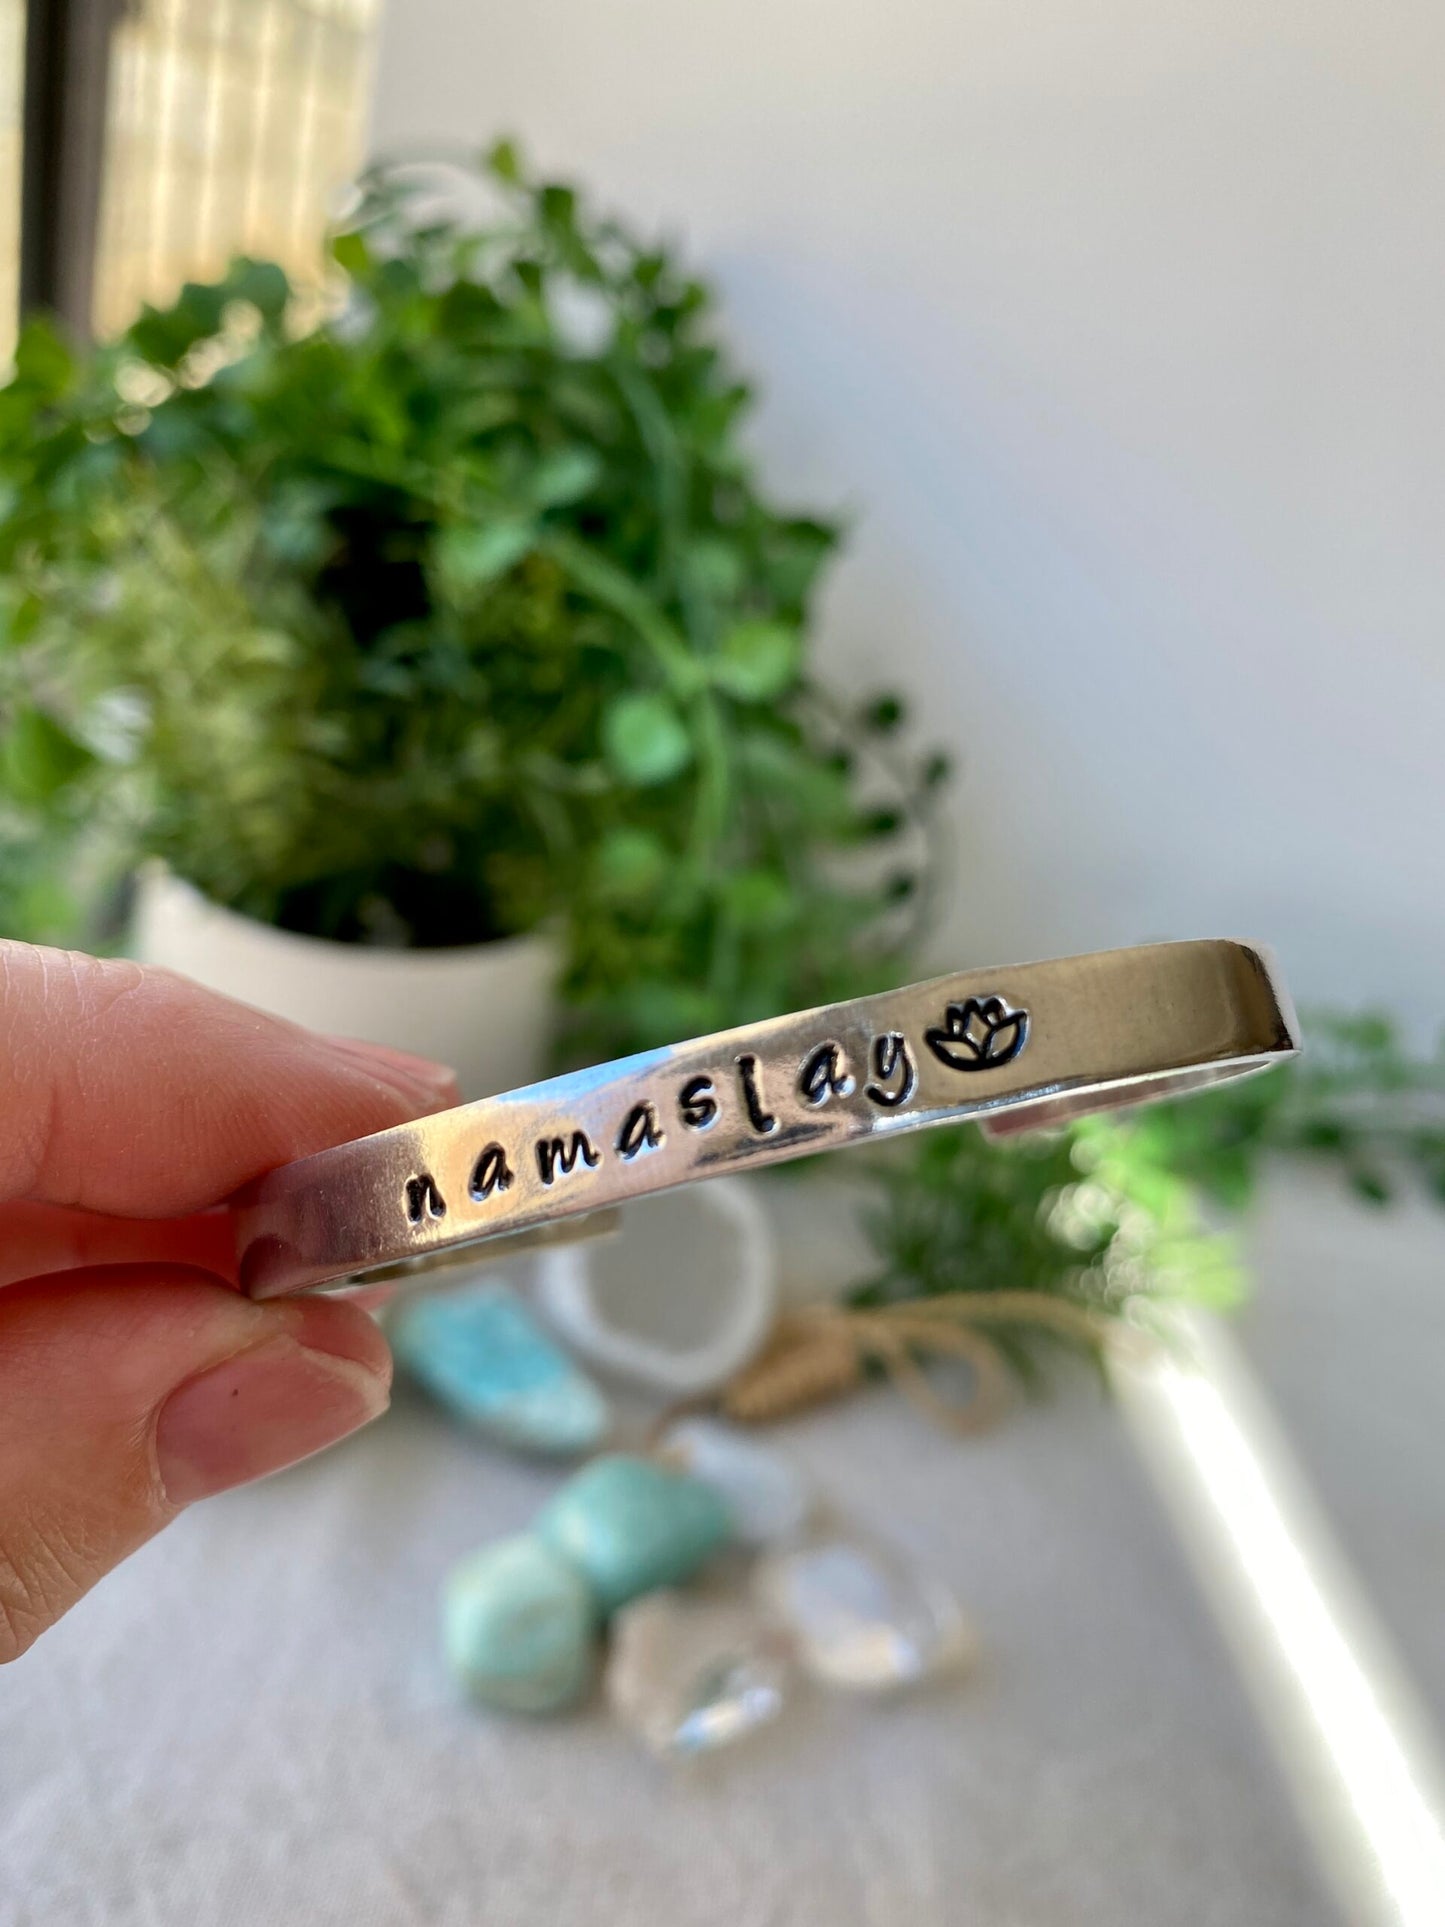 RESINATING WORDS - hand stamped ladies cuff bangle with NAMASLAY